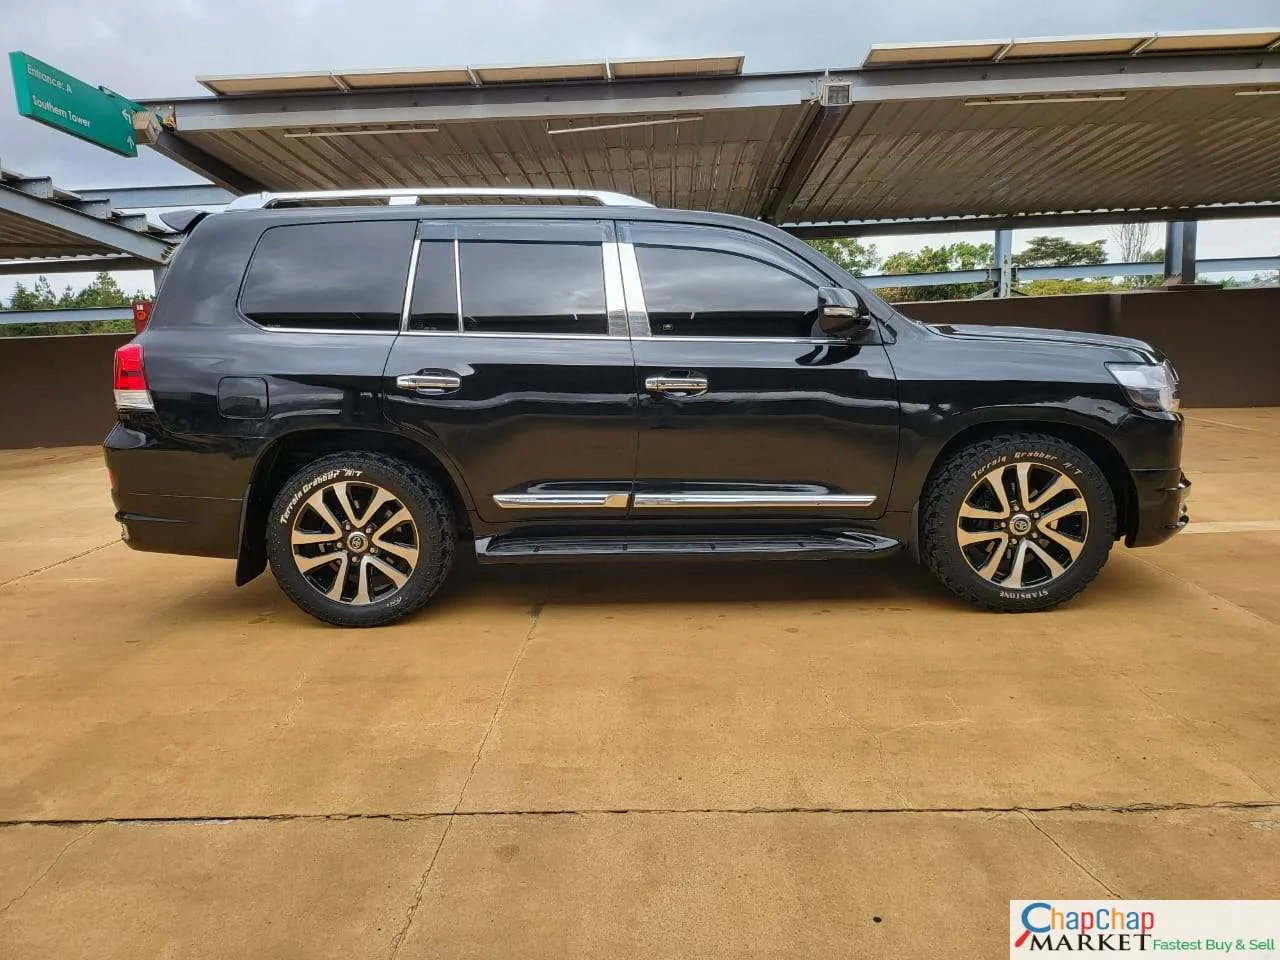 Cars Cars For Sale-Toyota Land Cruiser V8 ZX 200 SERIES QUICK SALE You Pay 30% Deposit Trade in Ok zx v8 for sale in kenya hire purchase installments 9